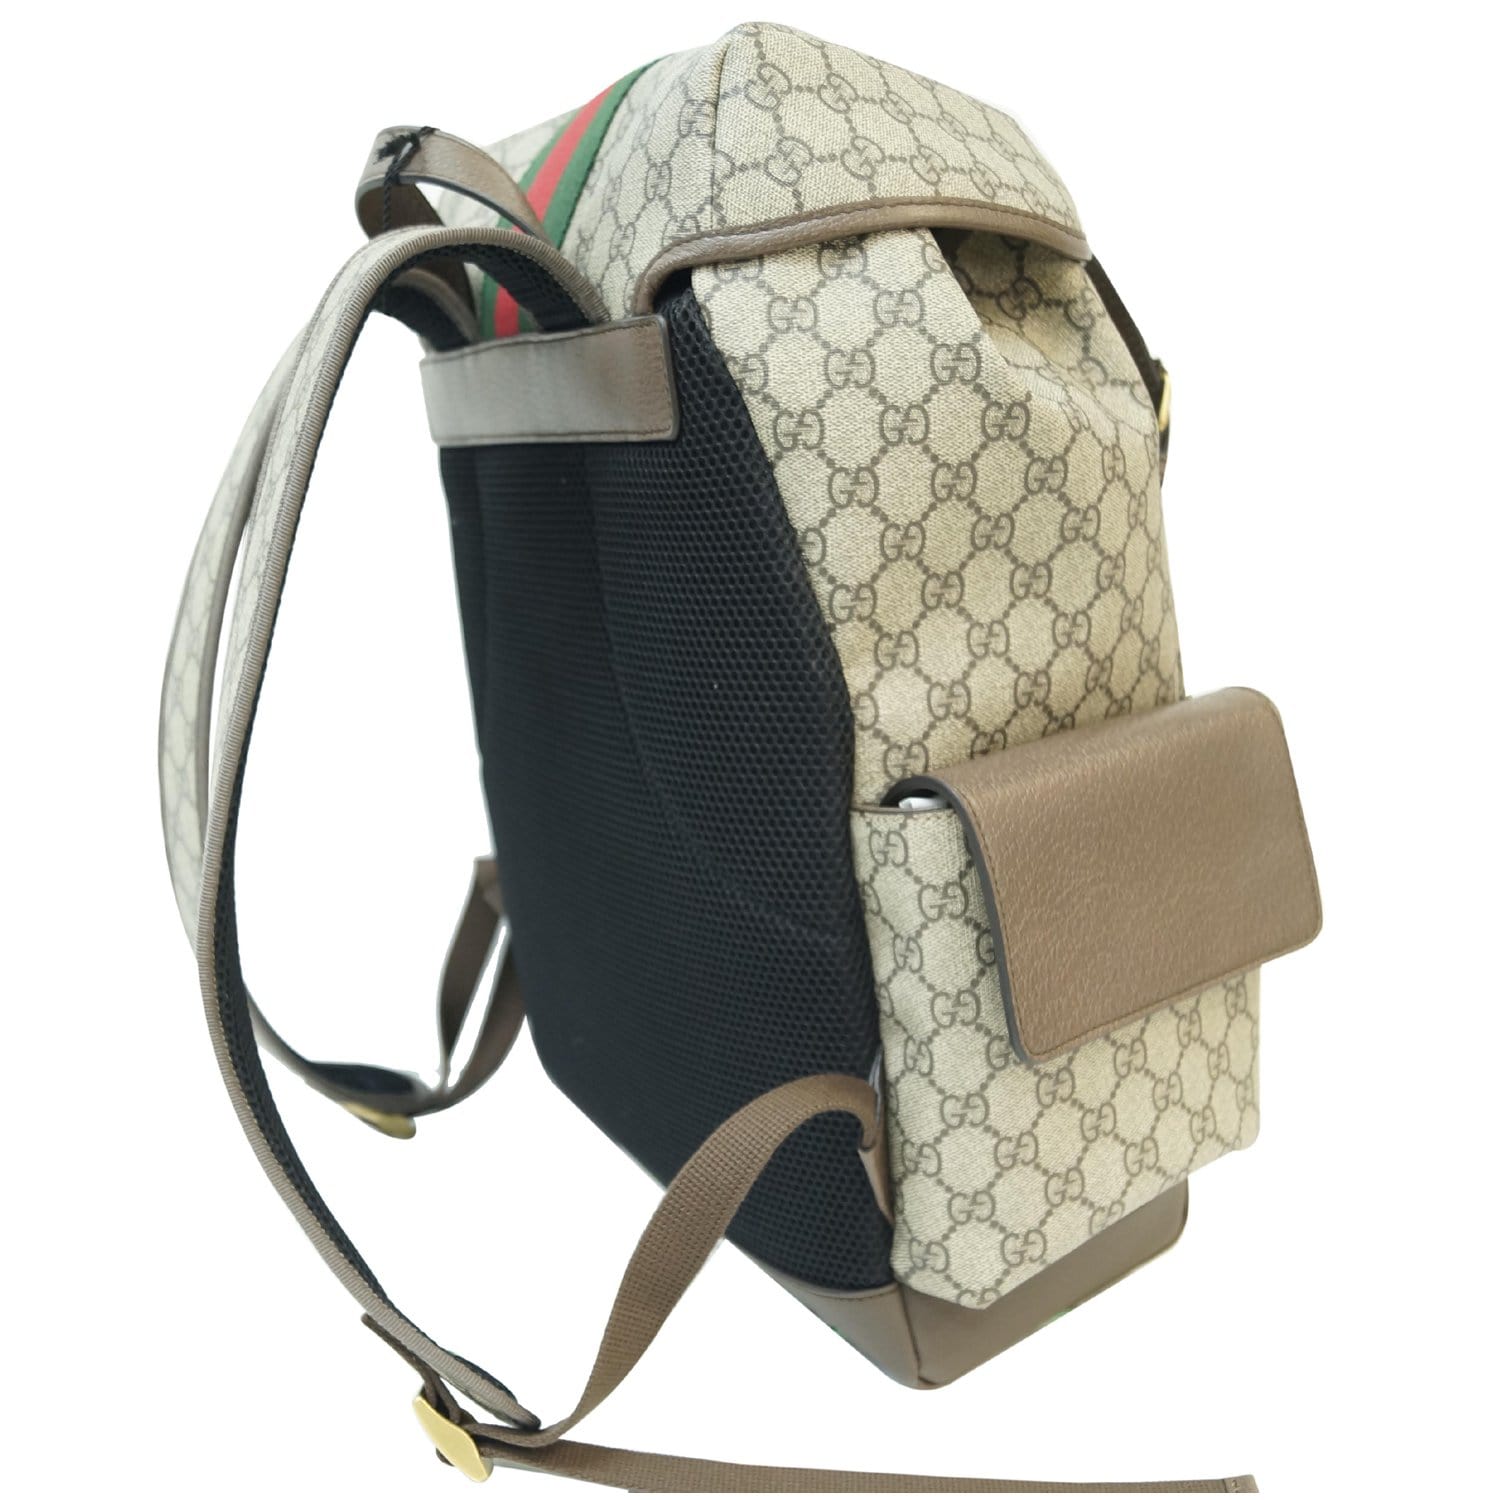 Ophidia GG medium backpack in beige and blue GG Supreme